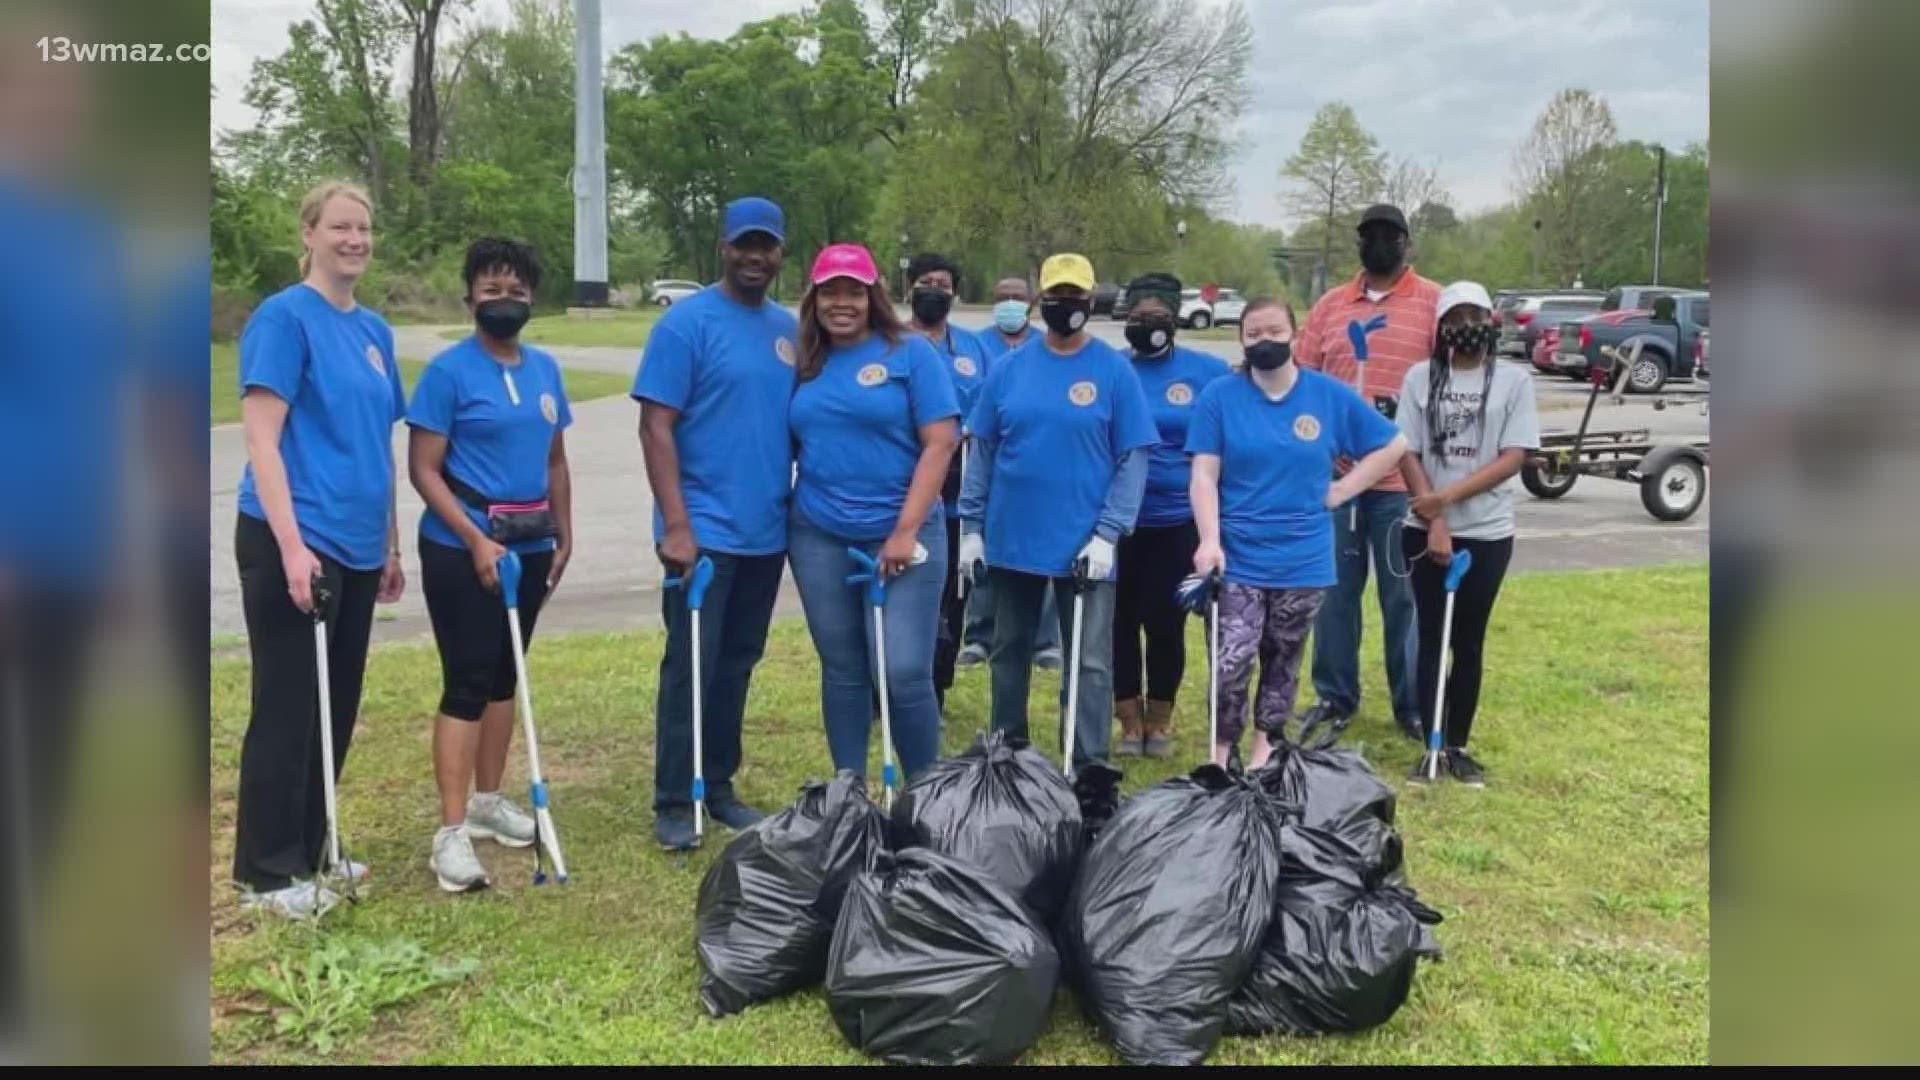 Keep Macon-Bibb Beautiful and Macon-Bibb County team up for next cleanup date on July 24